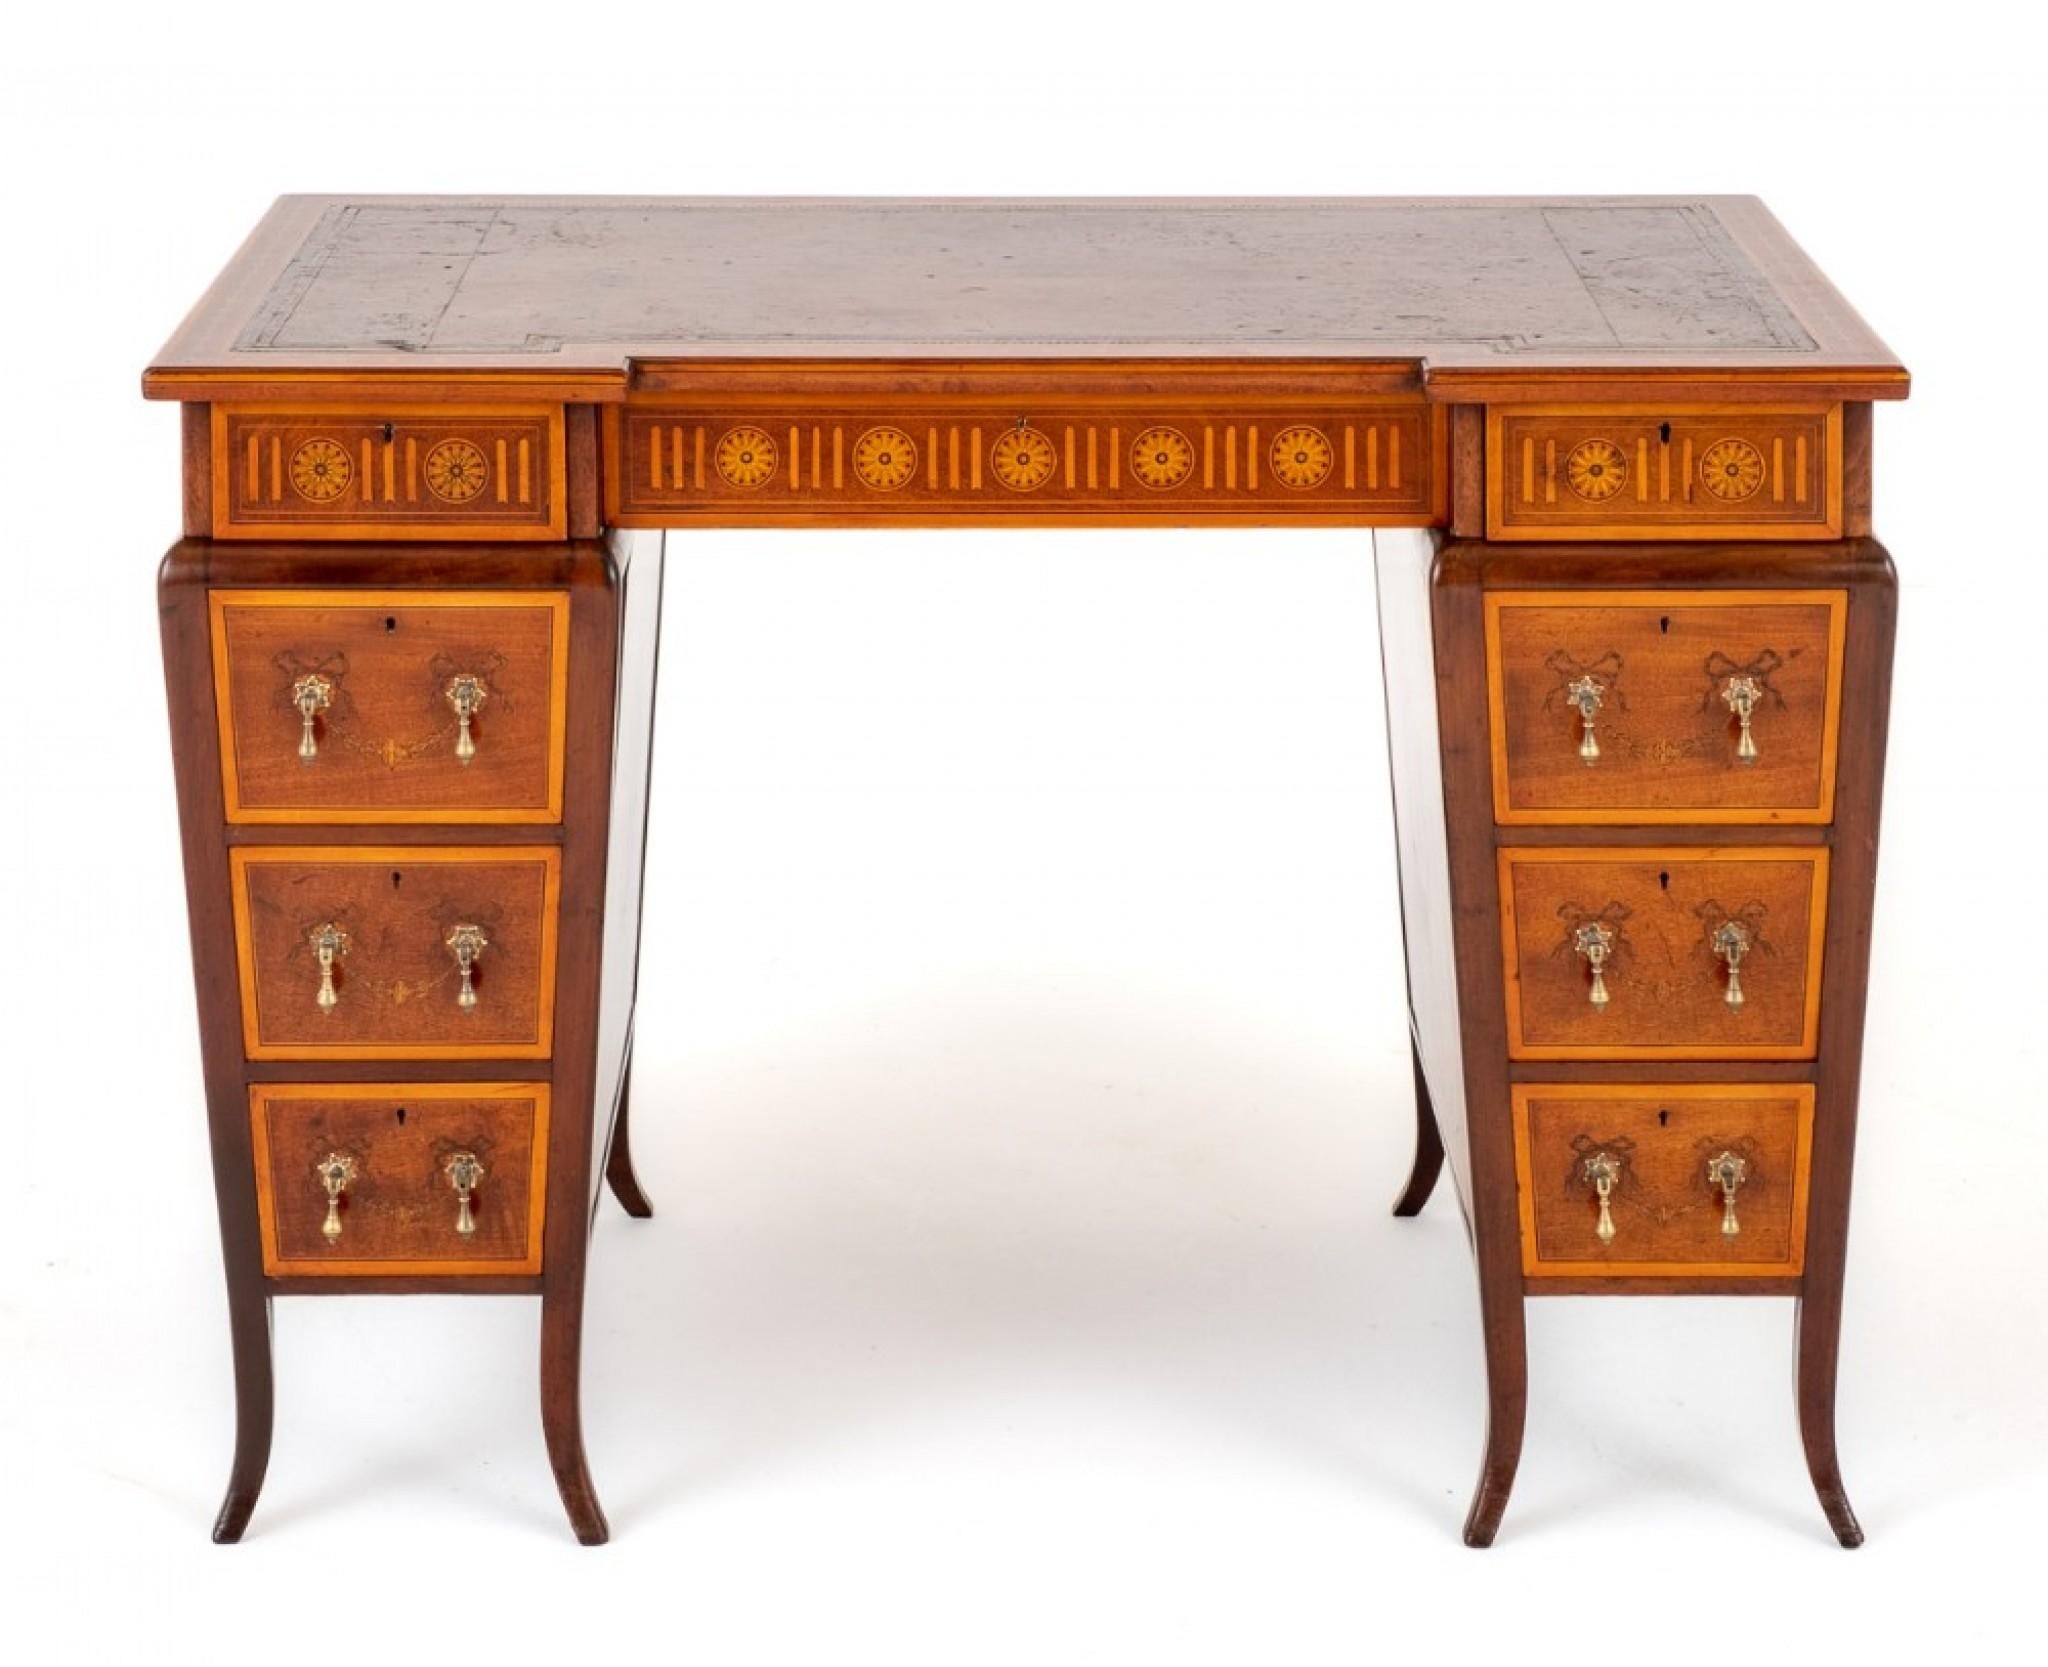 Pretty Mahogany Sheraton Revival Pedestal Desk.
This Desk Stands Upon Shaped Legs.
Circa 1880
Each Pedestal Featuring 3 Graduated mahogany Lined Drawers.
The Drawer Fronts Having Teardrop Brass Handles and Inlaid Bows and Swags.
The Frieze of the